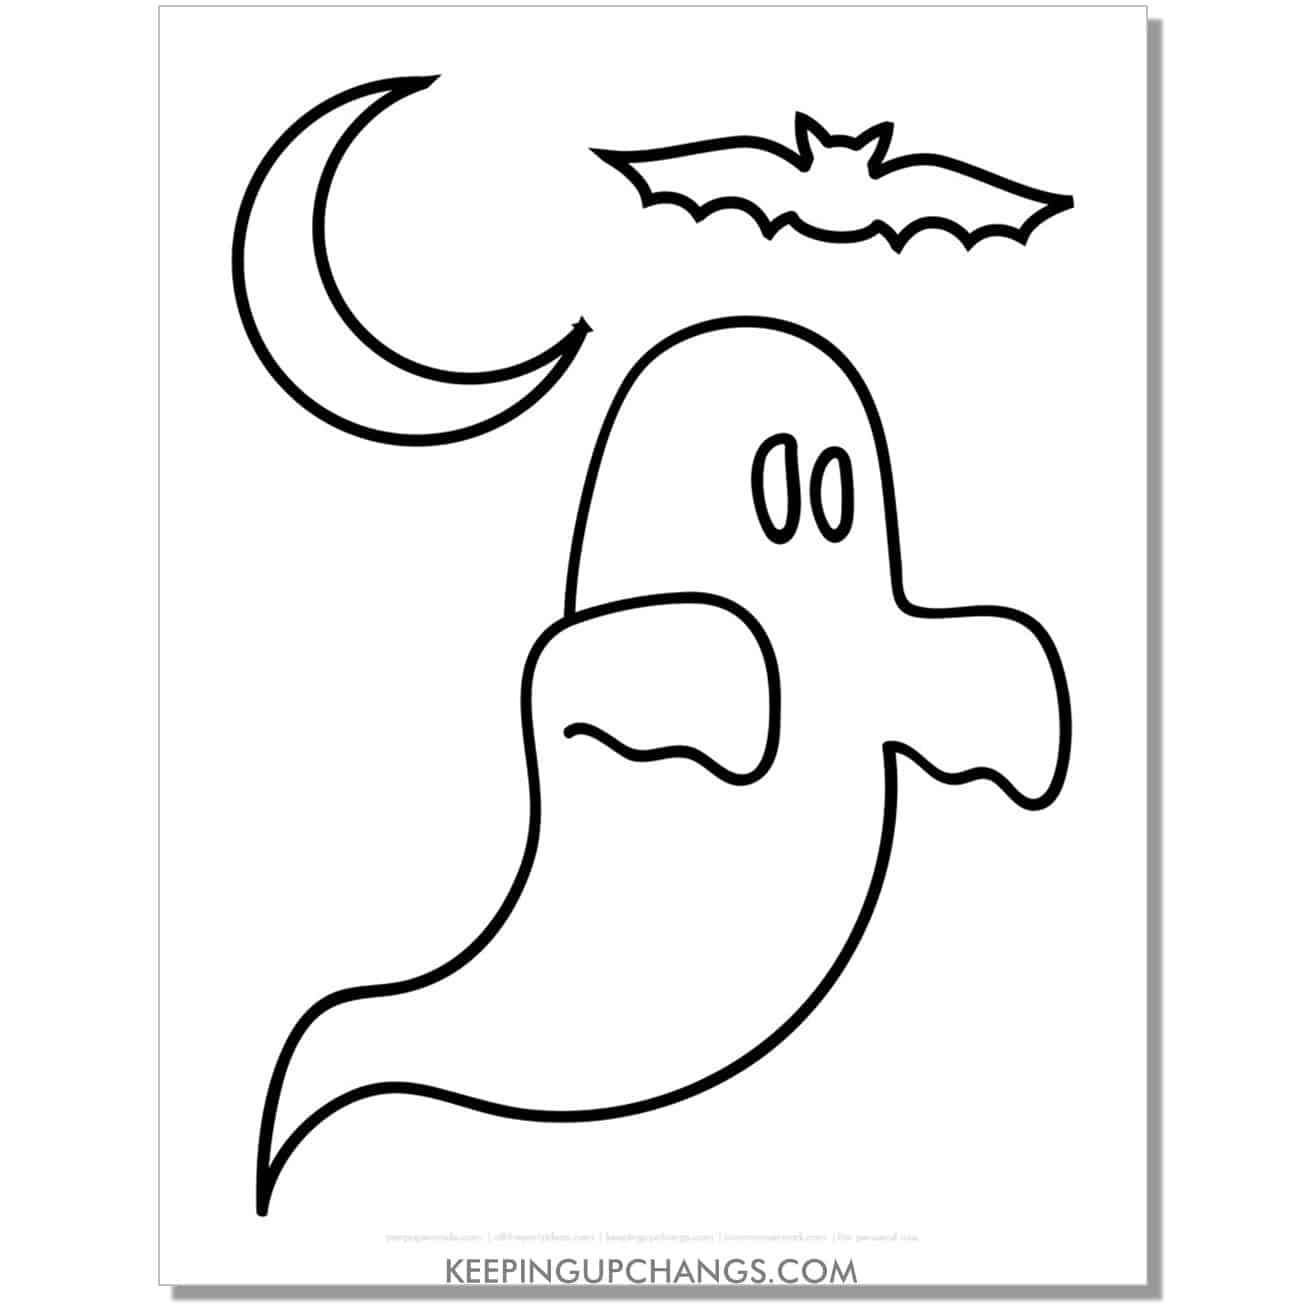 free simple ghost with moon and bat outline coloring page.